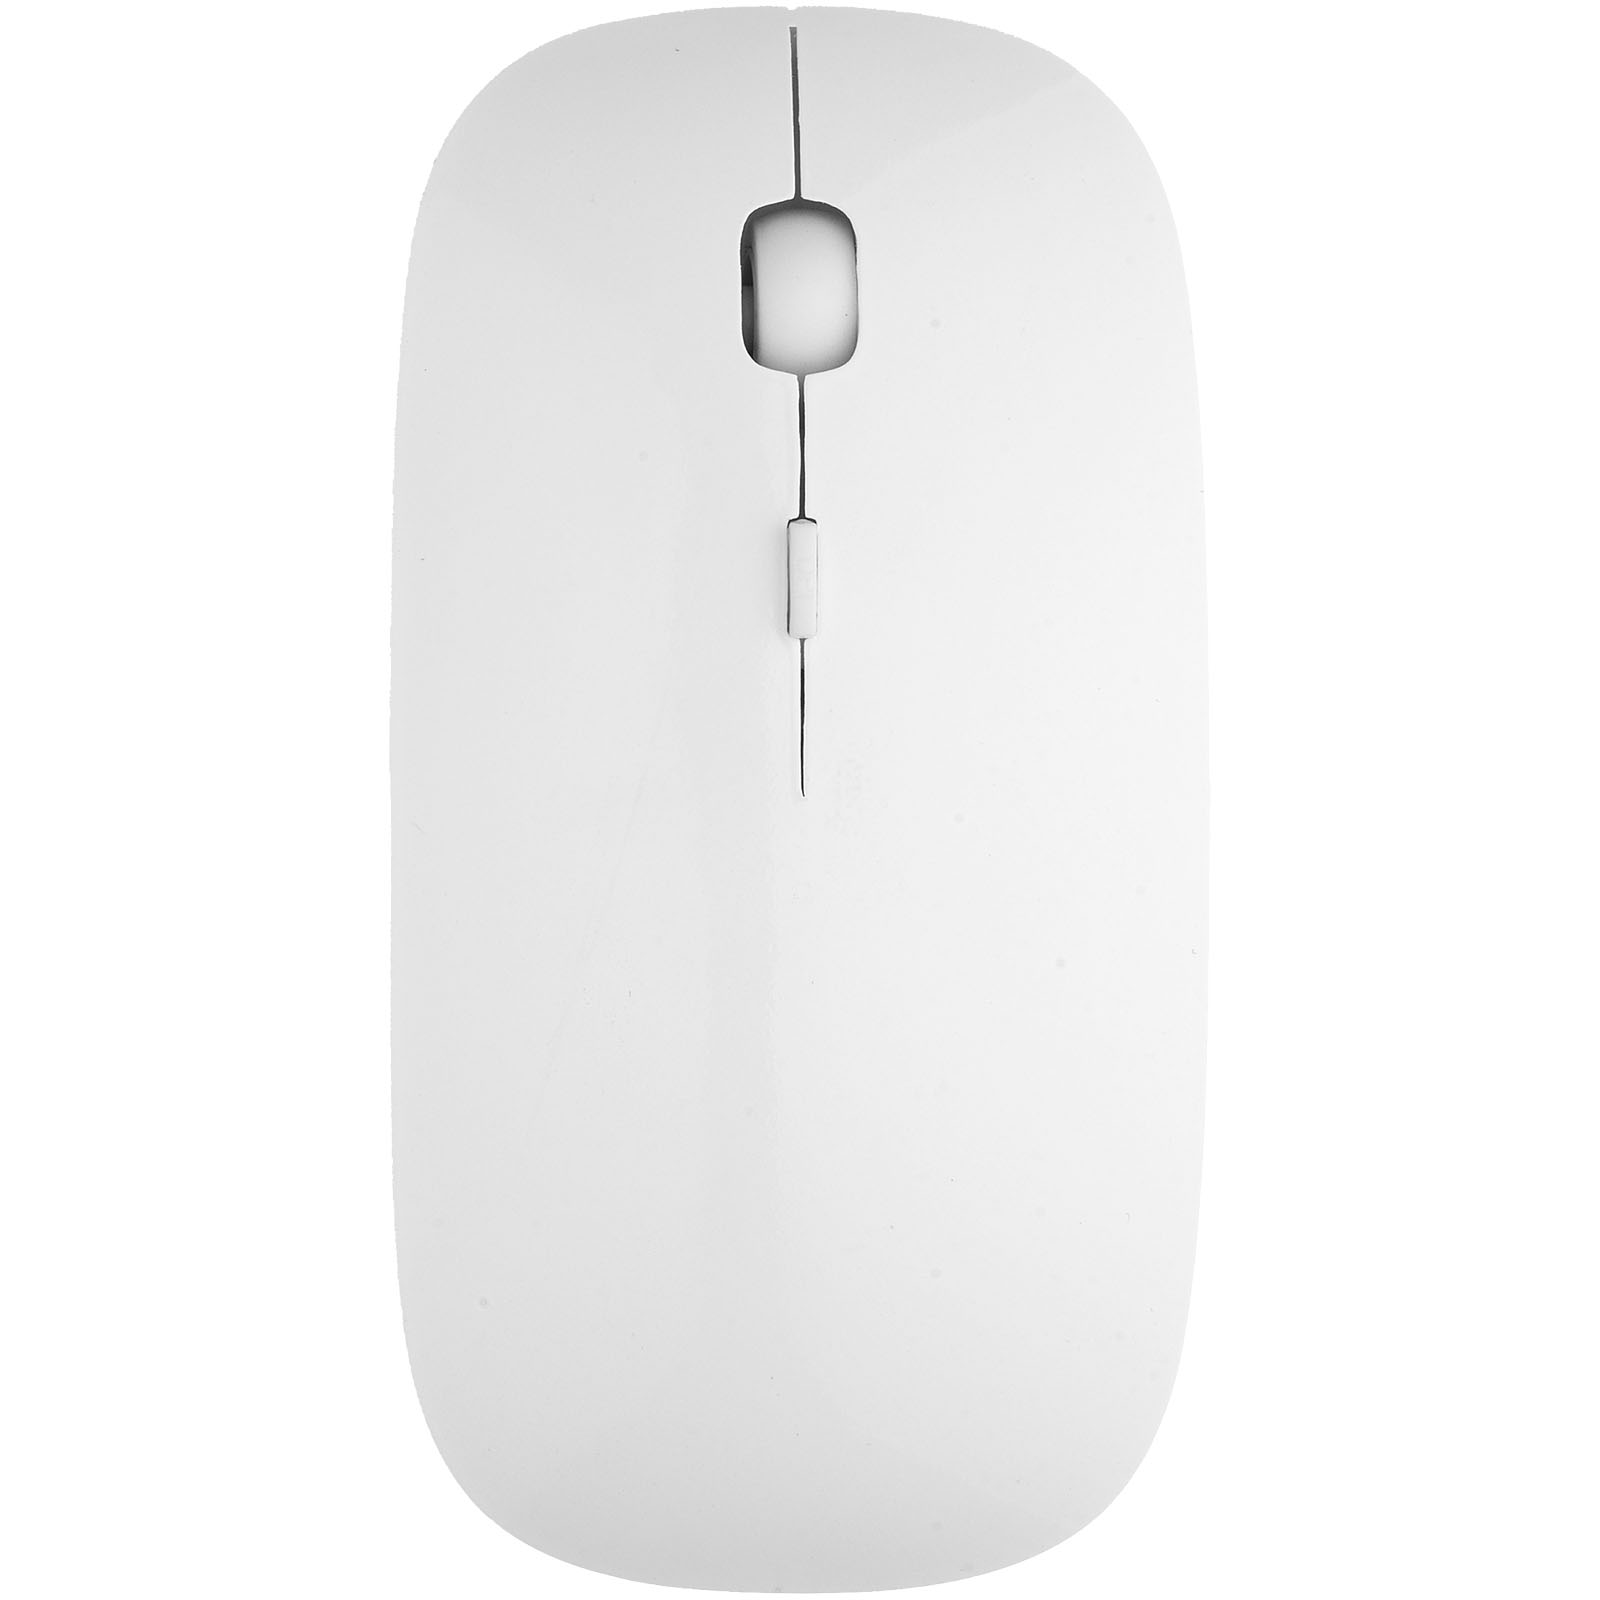 Advertising Computer Accessories - Menlo wireless mouse - 1